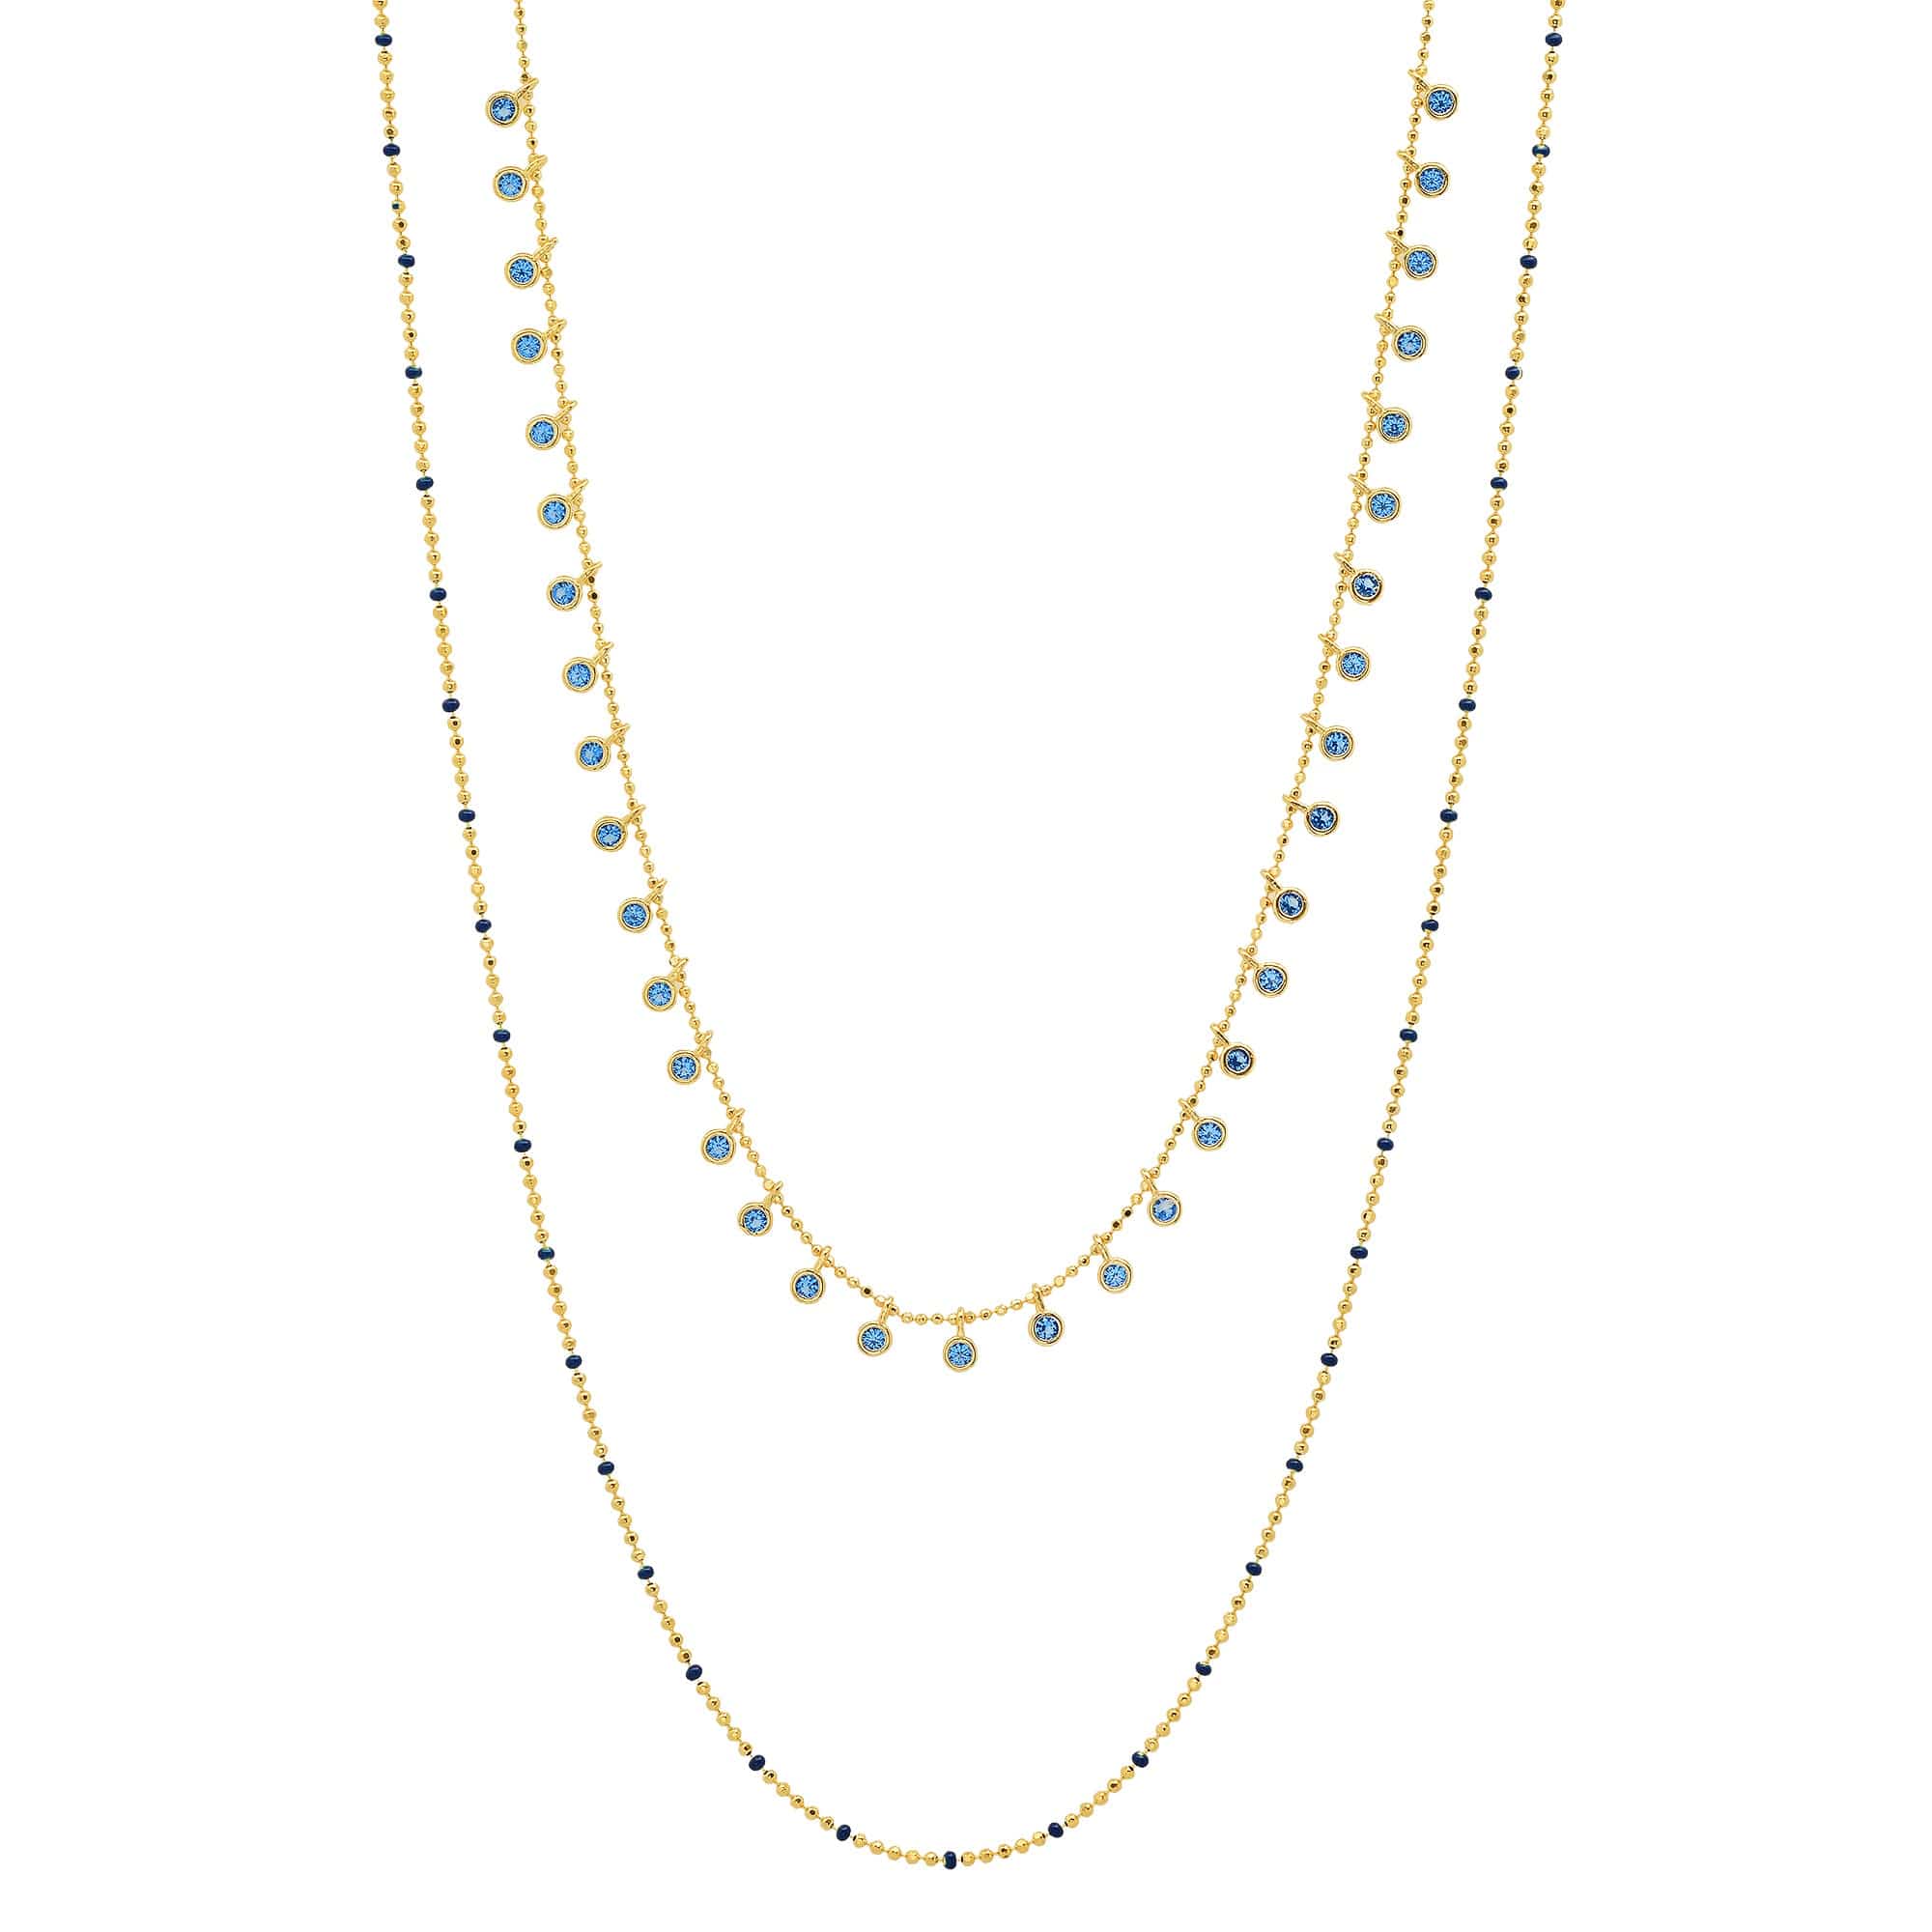 TAI JEWELRY Necklace Blue Double-Layered Ball Chain Necklace With Cz Accents